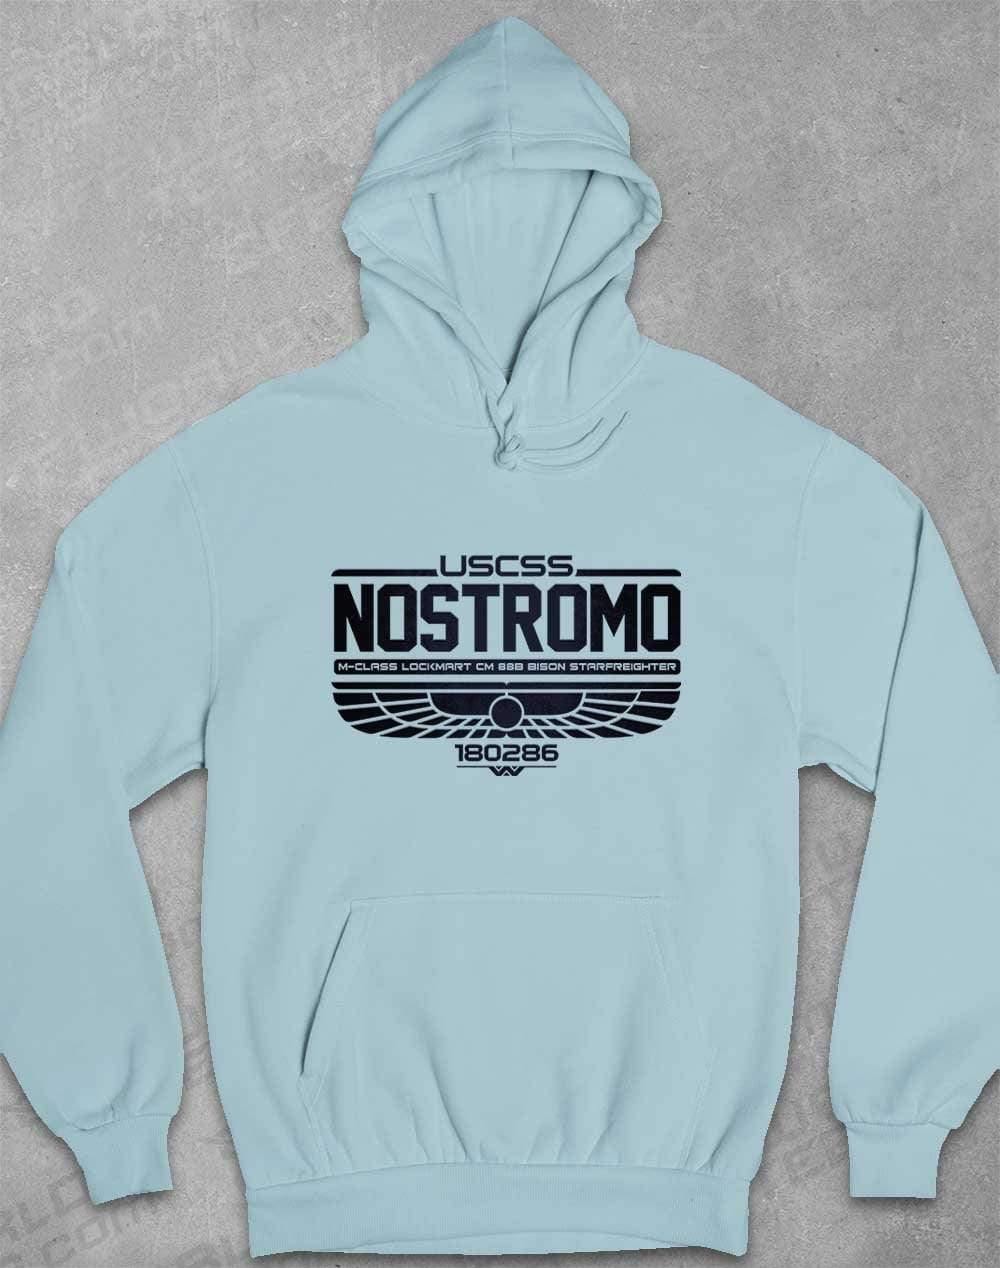 USCSS Nostromo Hoodie XS / Sky Blue  - Off World Tees